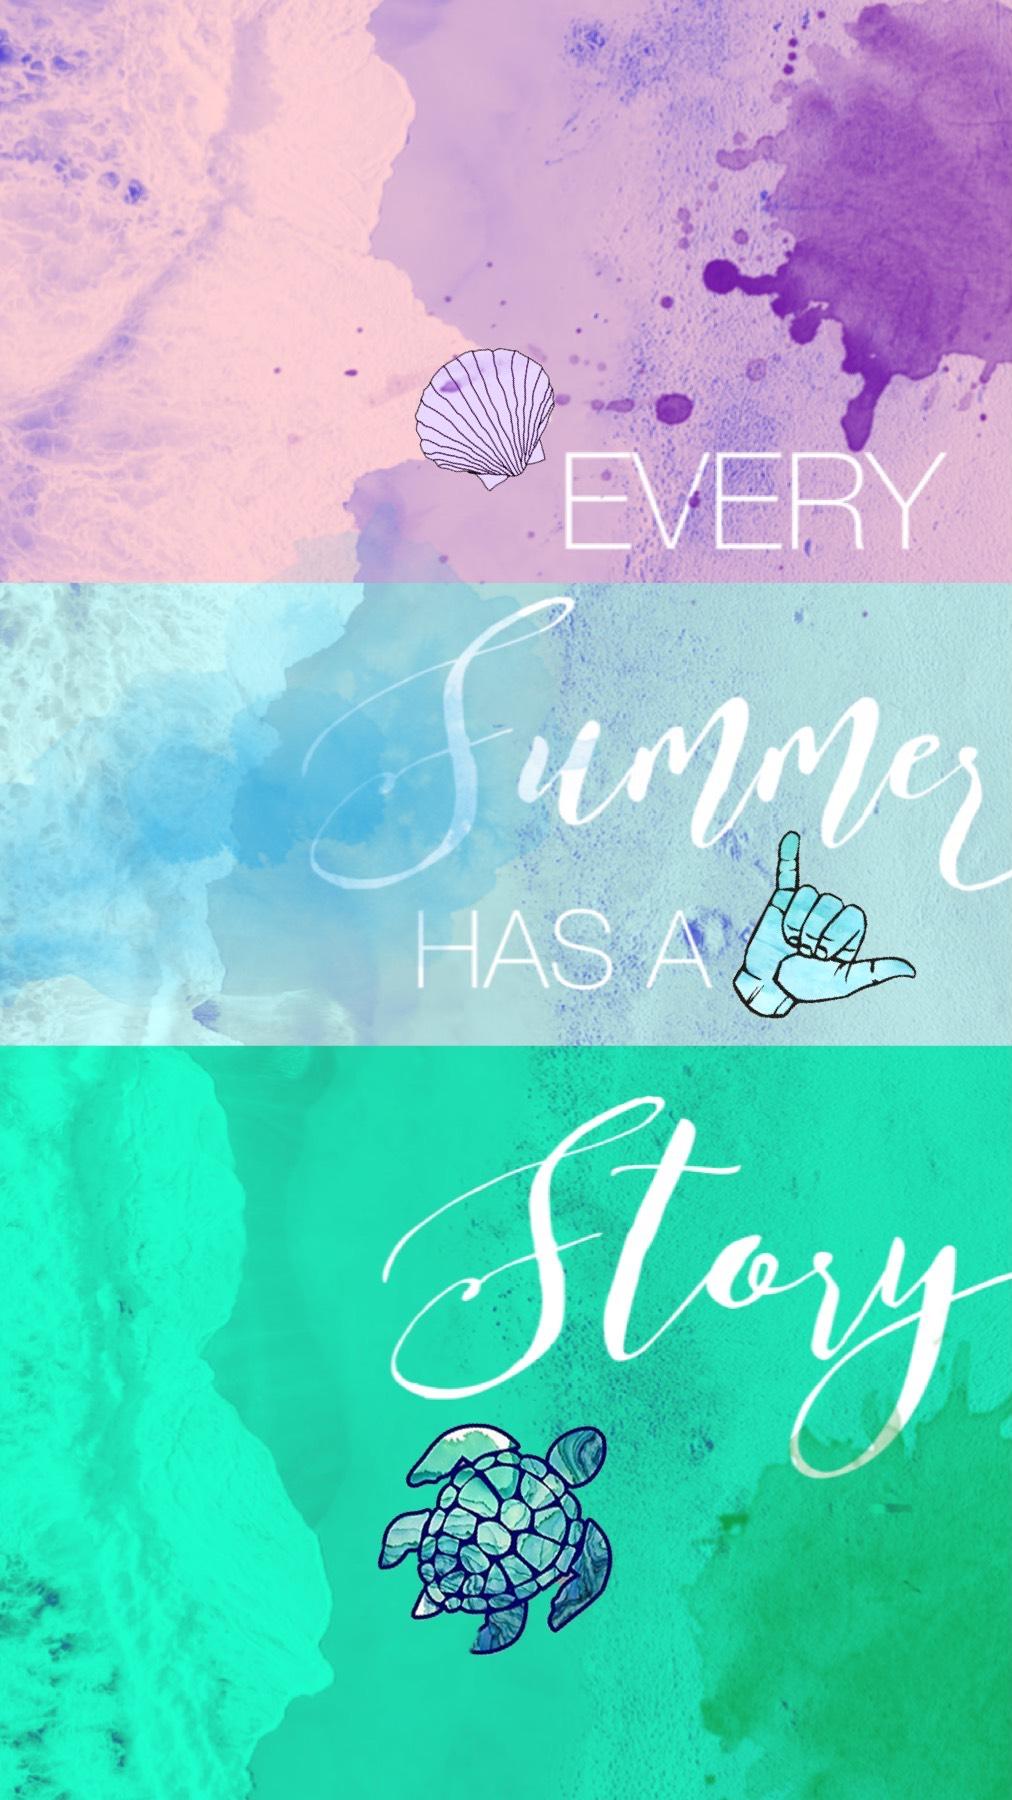 Every Summer Has a Story...
-
Also paired with WordSwag!